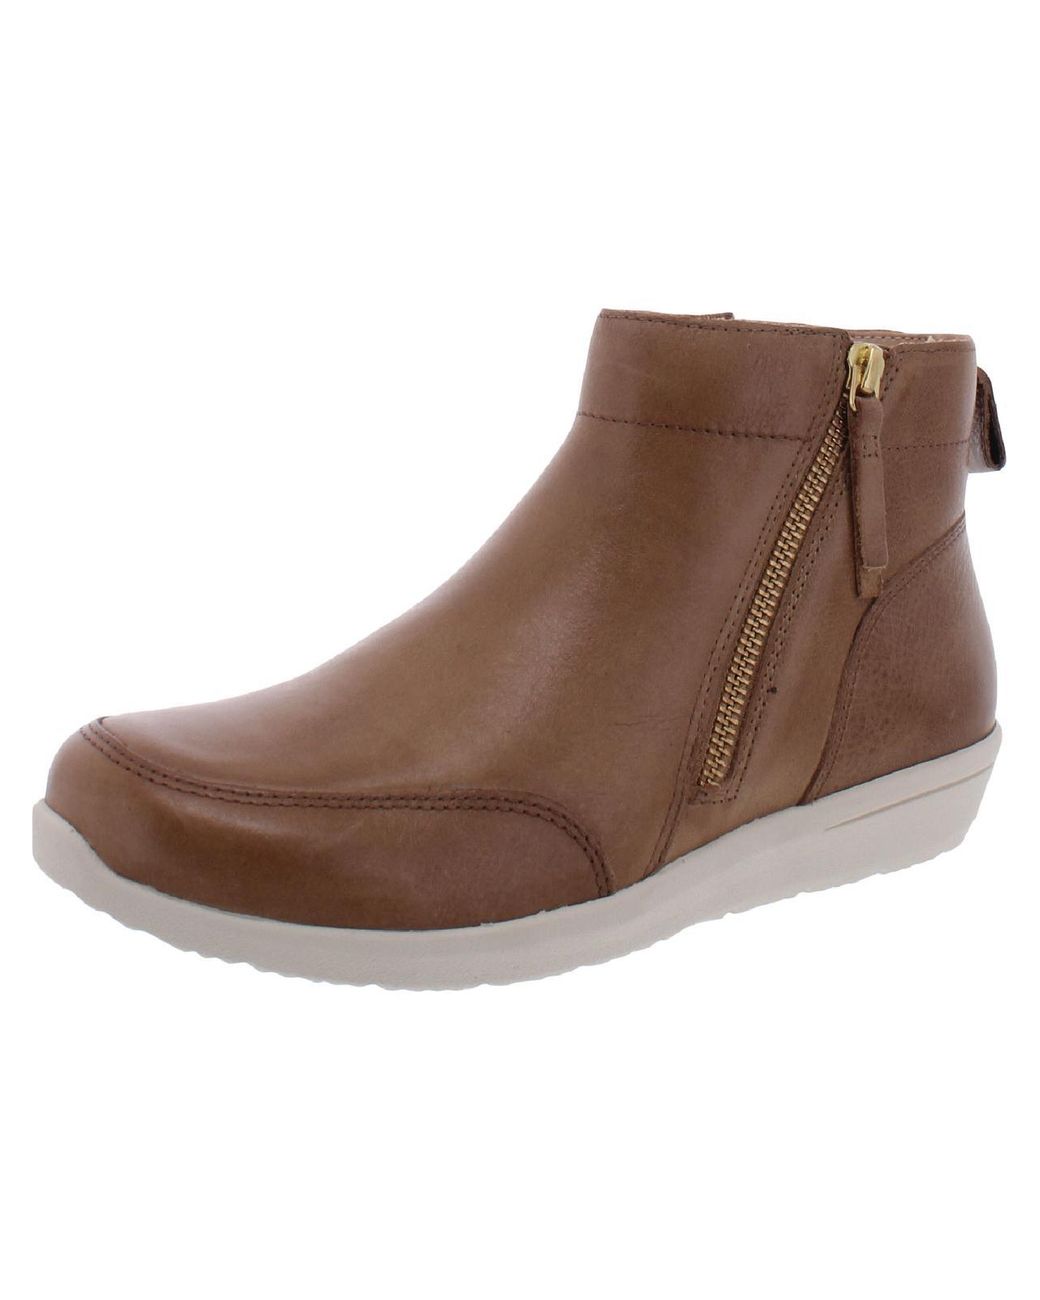 Vionic Lois Leather Round Toe Ankle Boots in Brown | Lyst